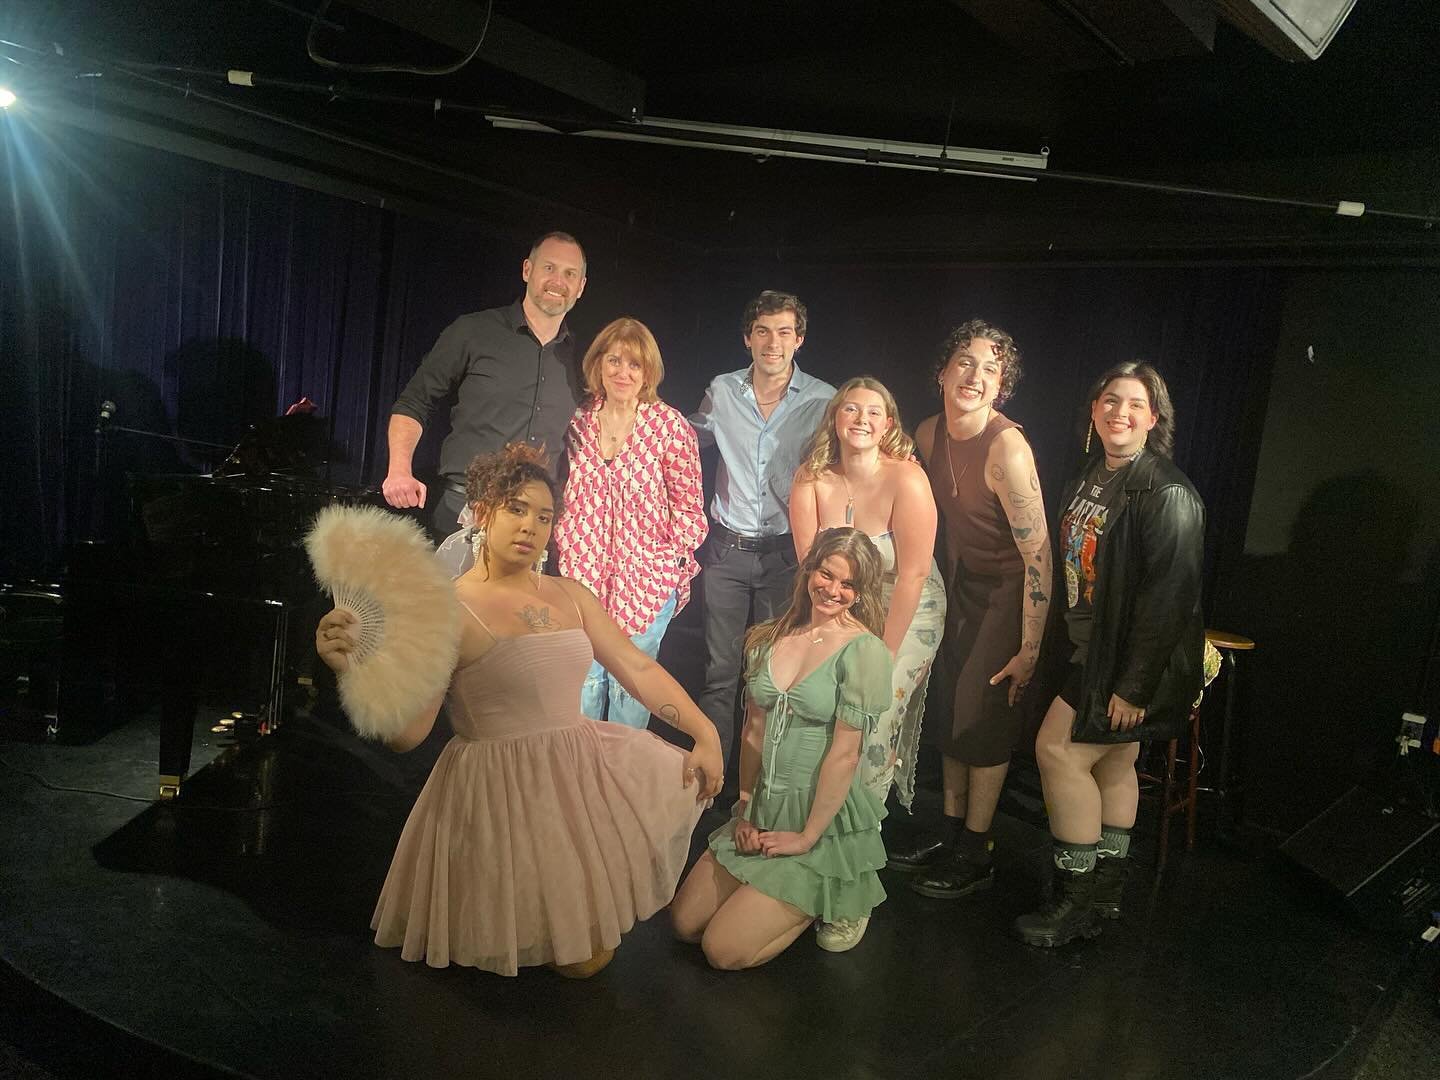 This semester Professor Wheatley taught/directed the @universityofthearts senior class in writing their capstone project; their Senior Cabaret shows. Thank you to UArts, these excellent and brave students, and especially my long-time friend @jacobbre